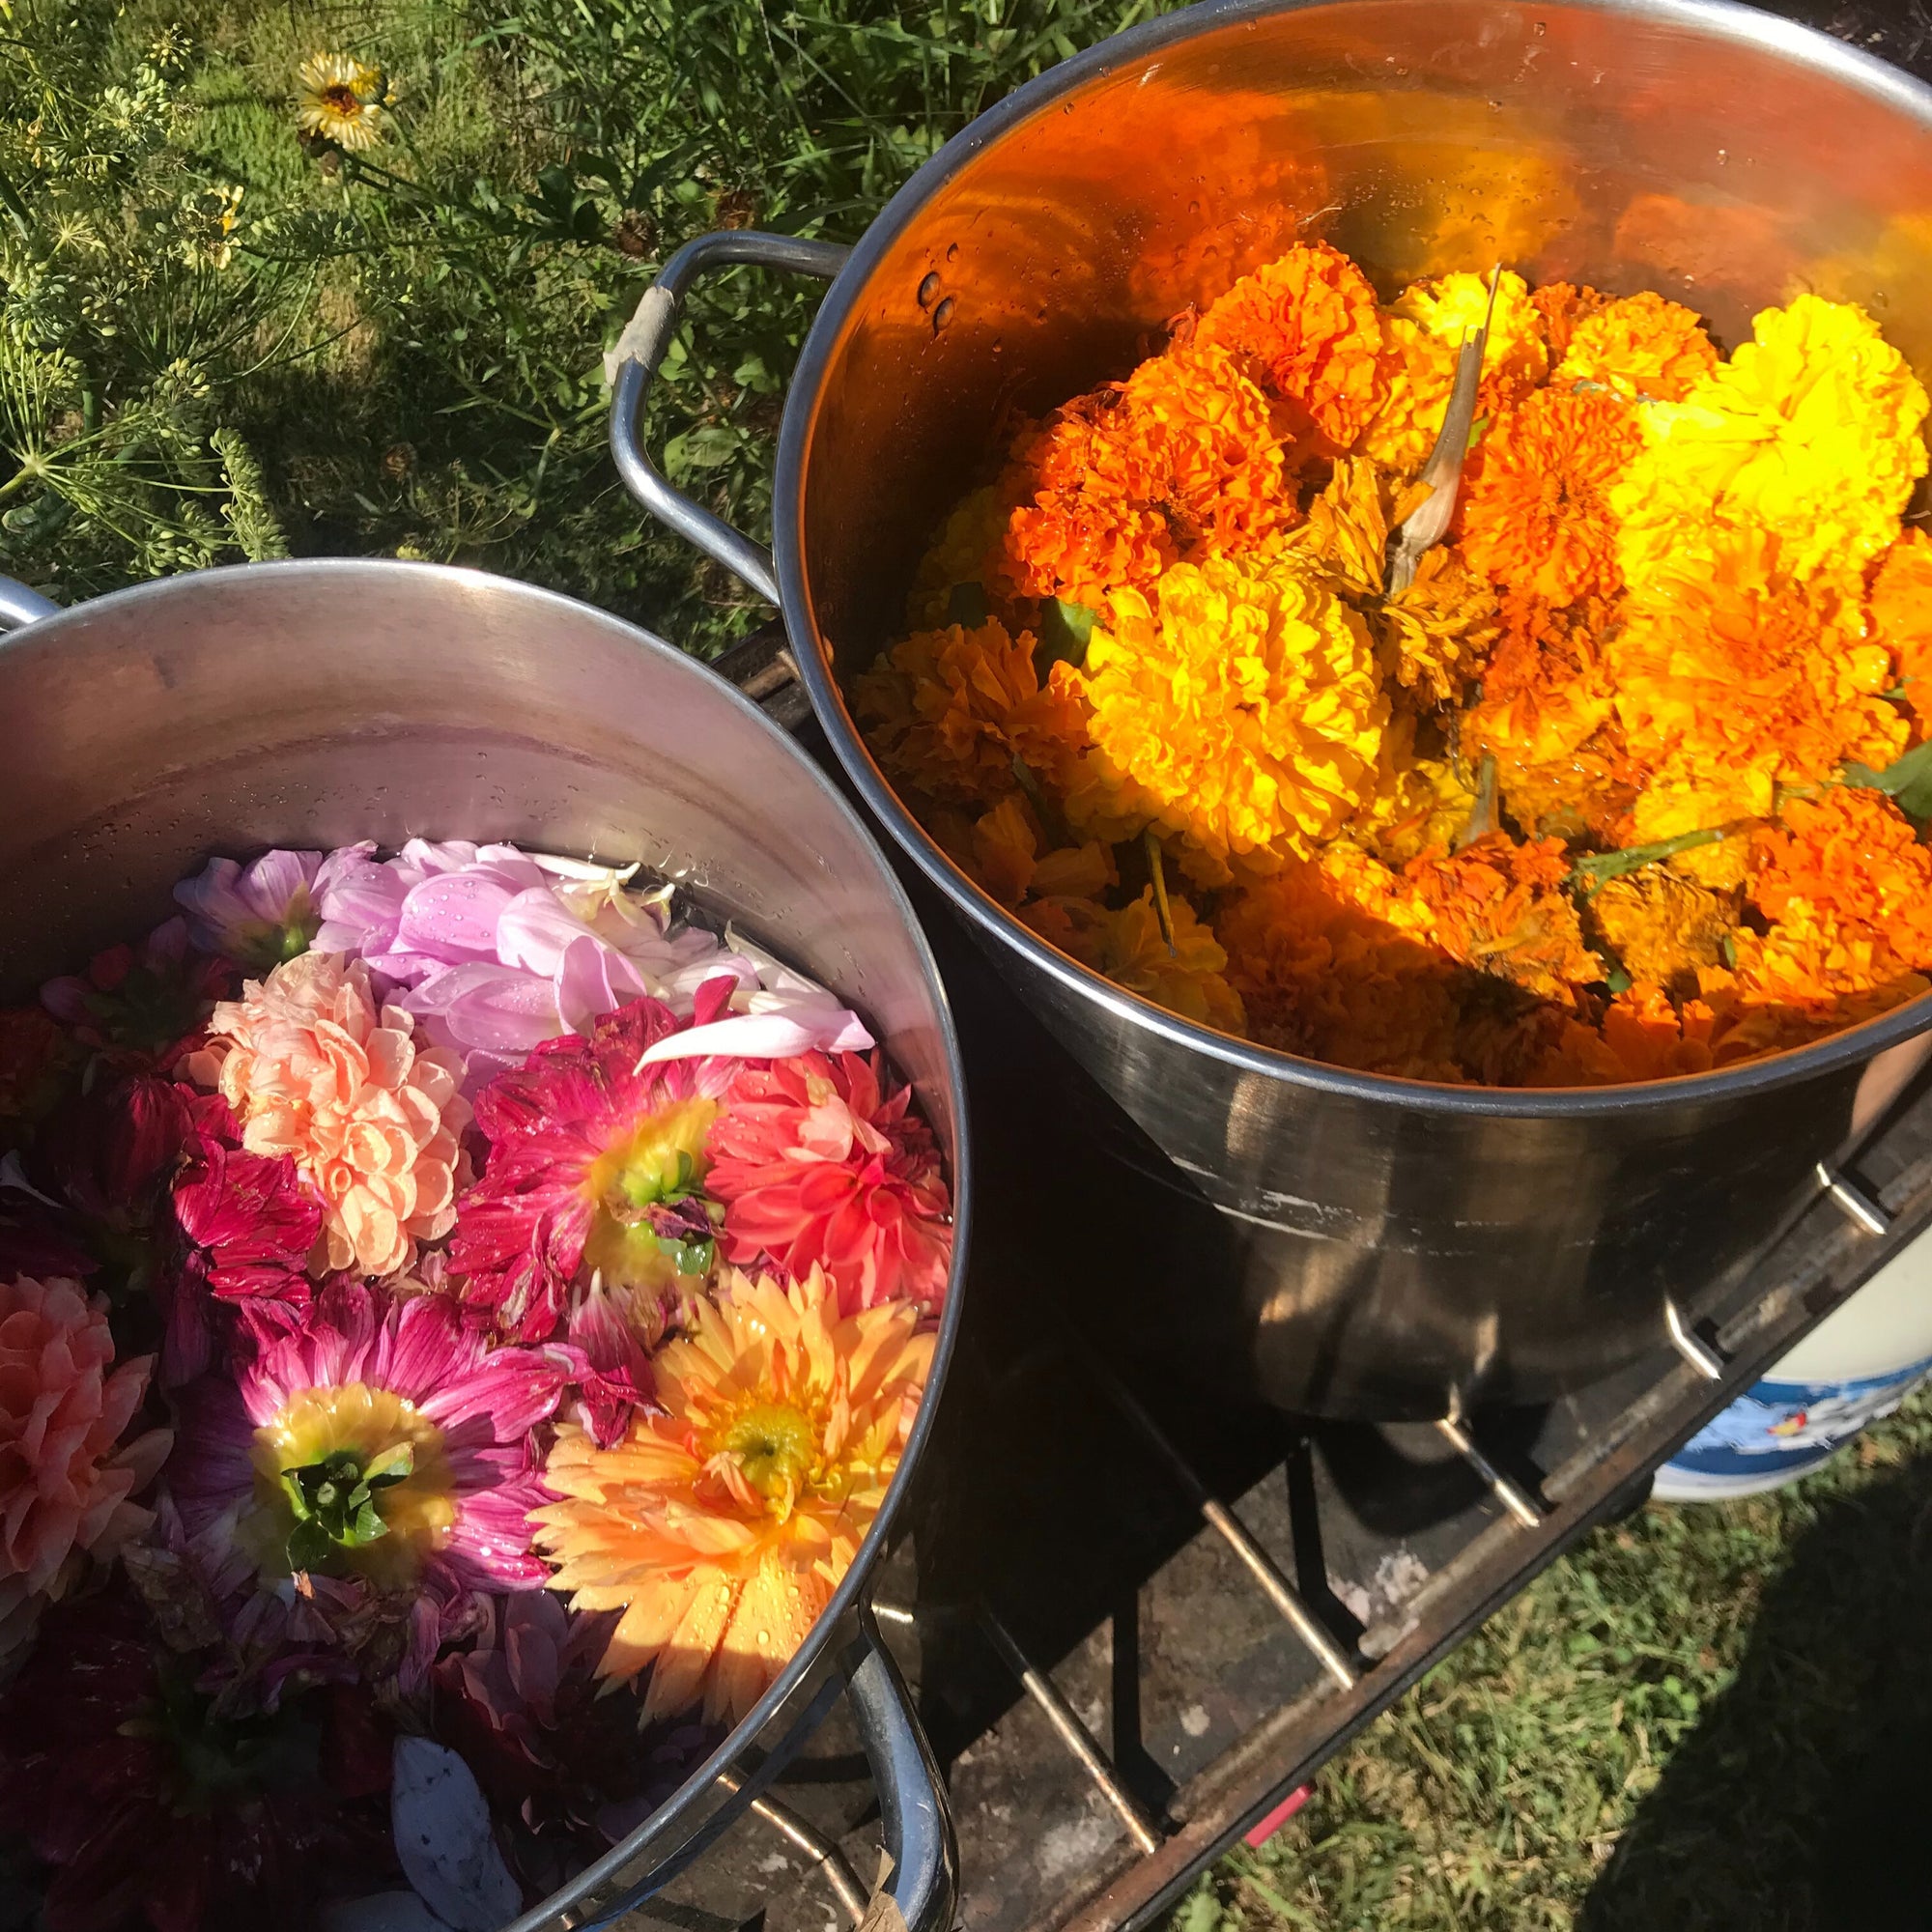 Introduction to Natural Dyes: Dyes from an Urban Landscape